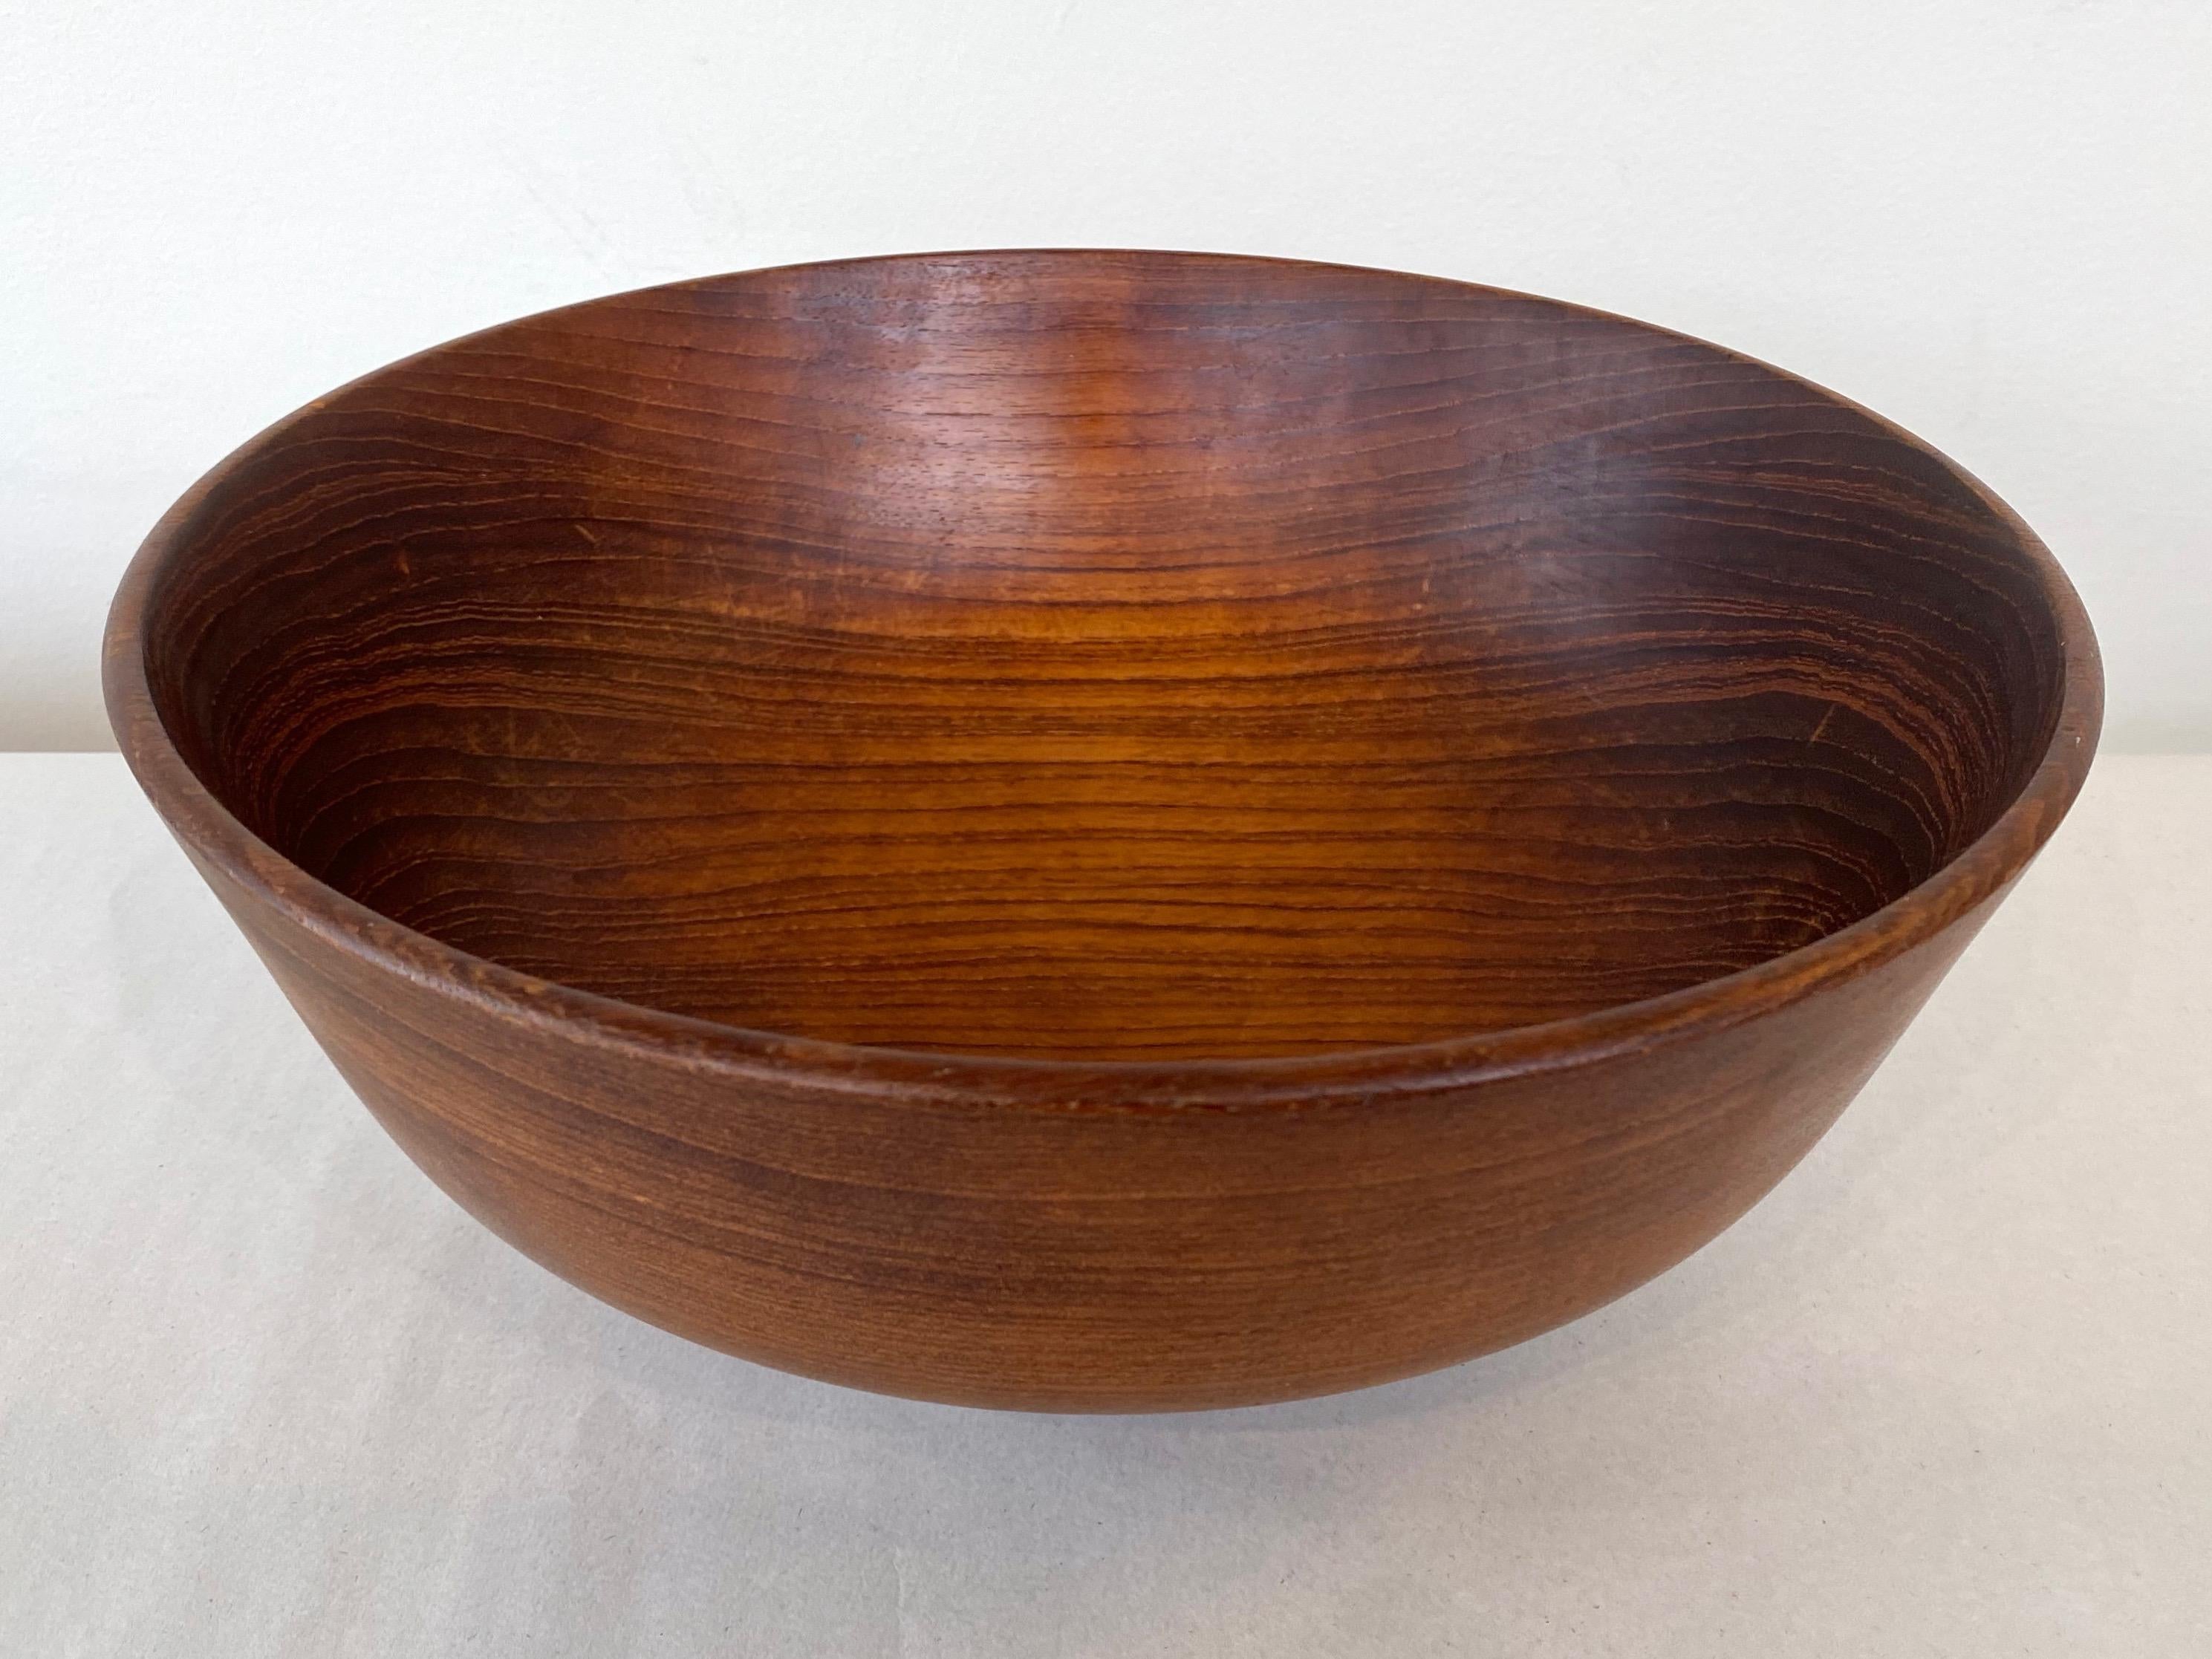 Bob Stocksdale Teak Turned Wood Bowl with Exceptional Grain Pattern, Early 1970s For Sale 4